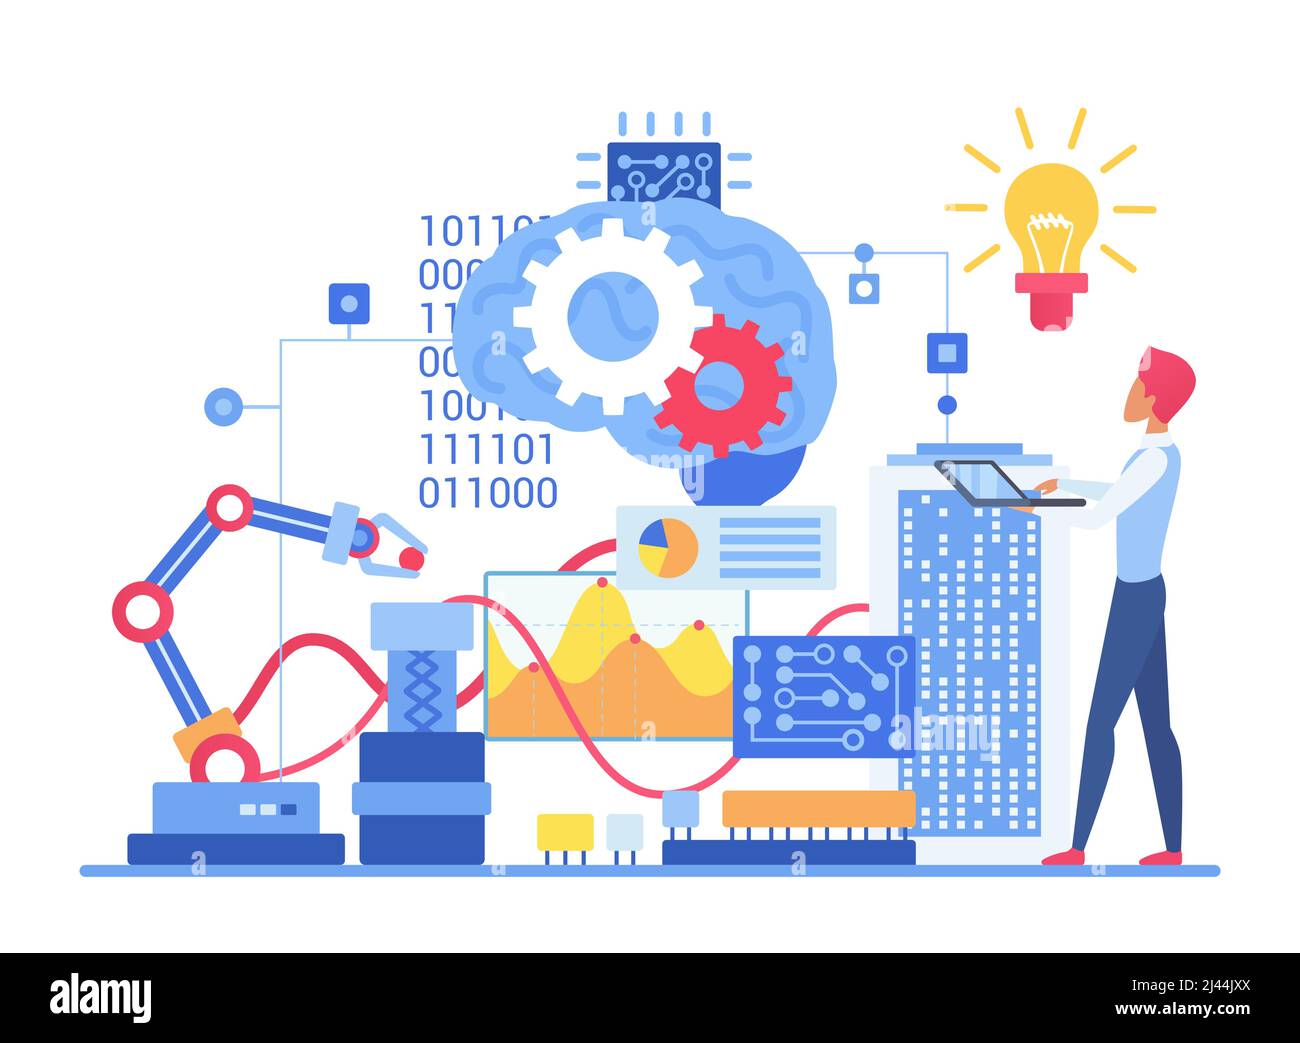 Artificial intelligence machine learning system. Automatically computer algorithms working process Stock Vector